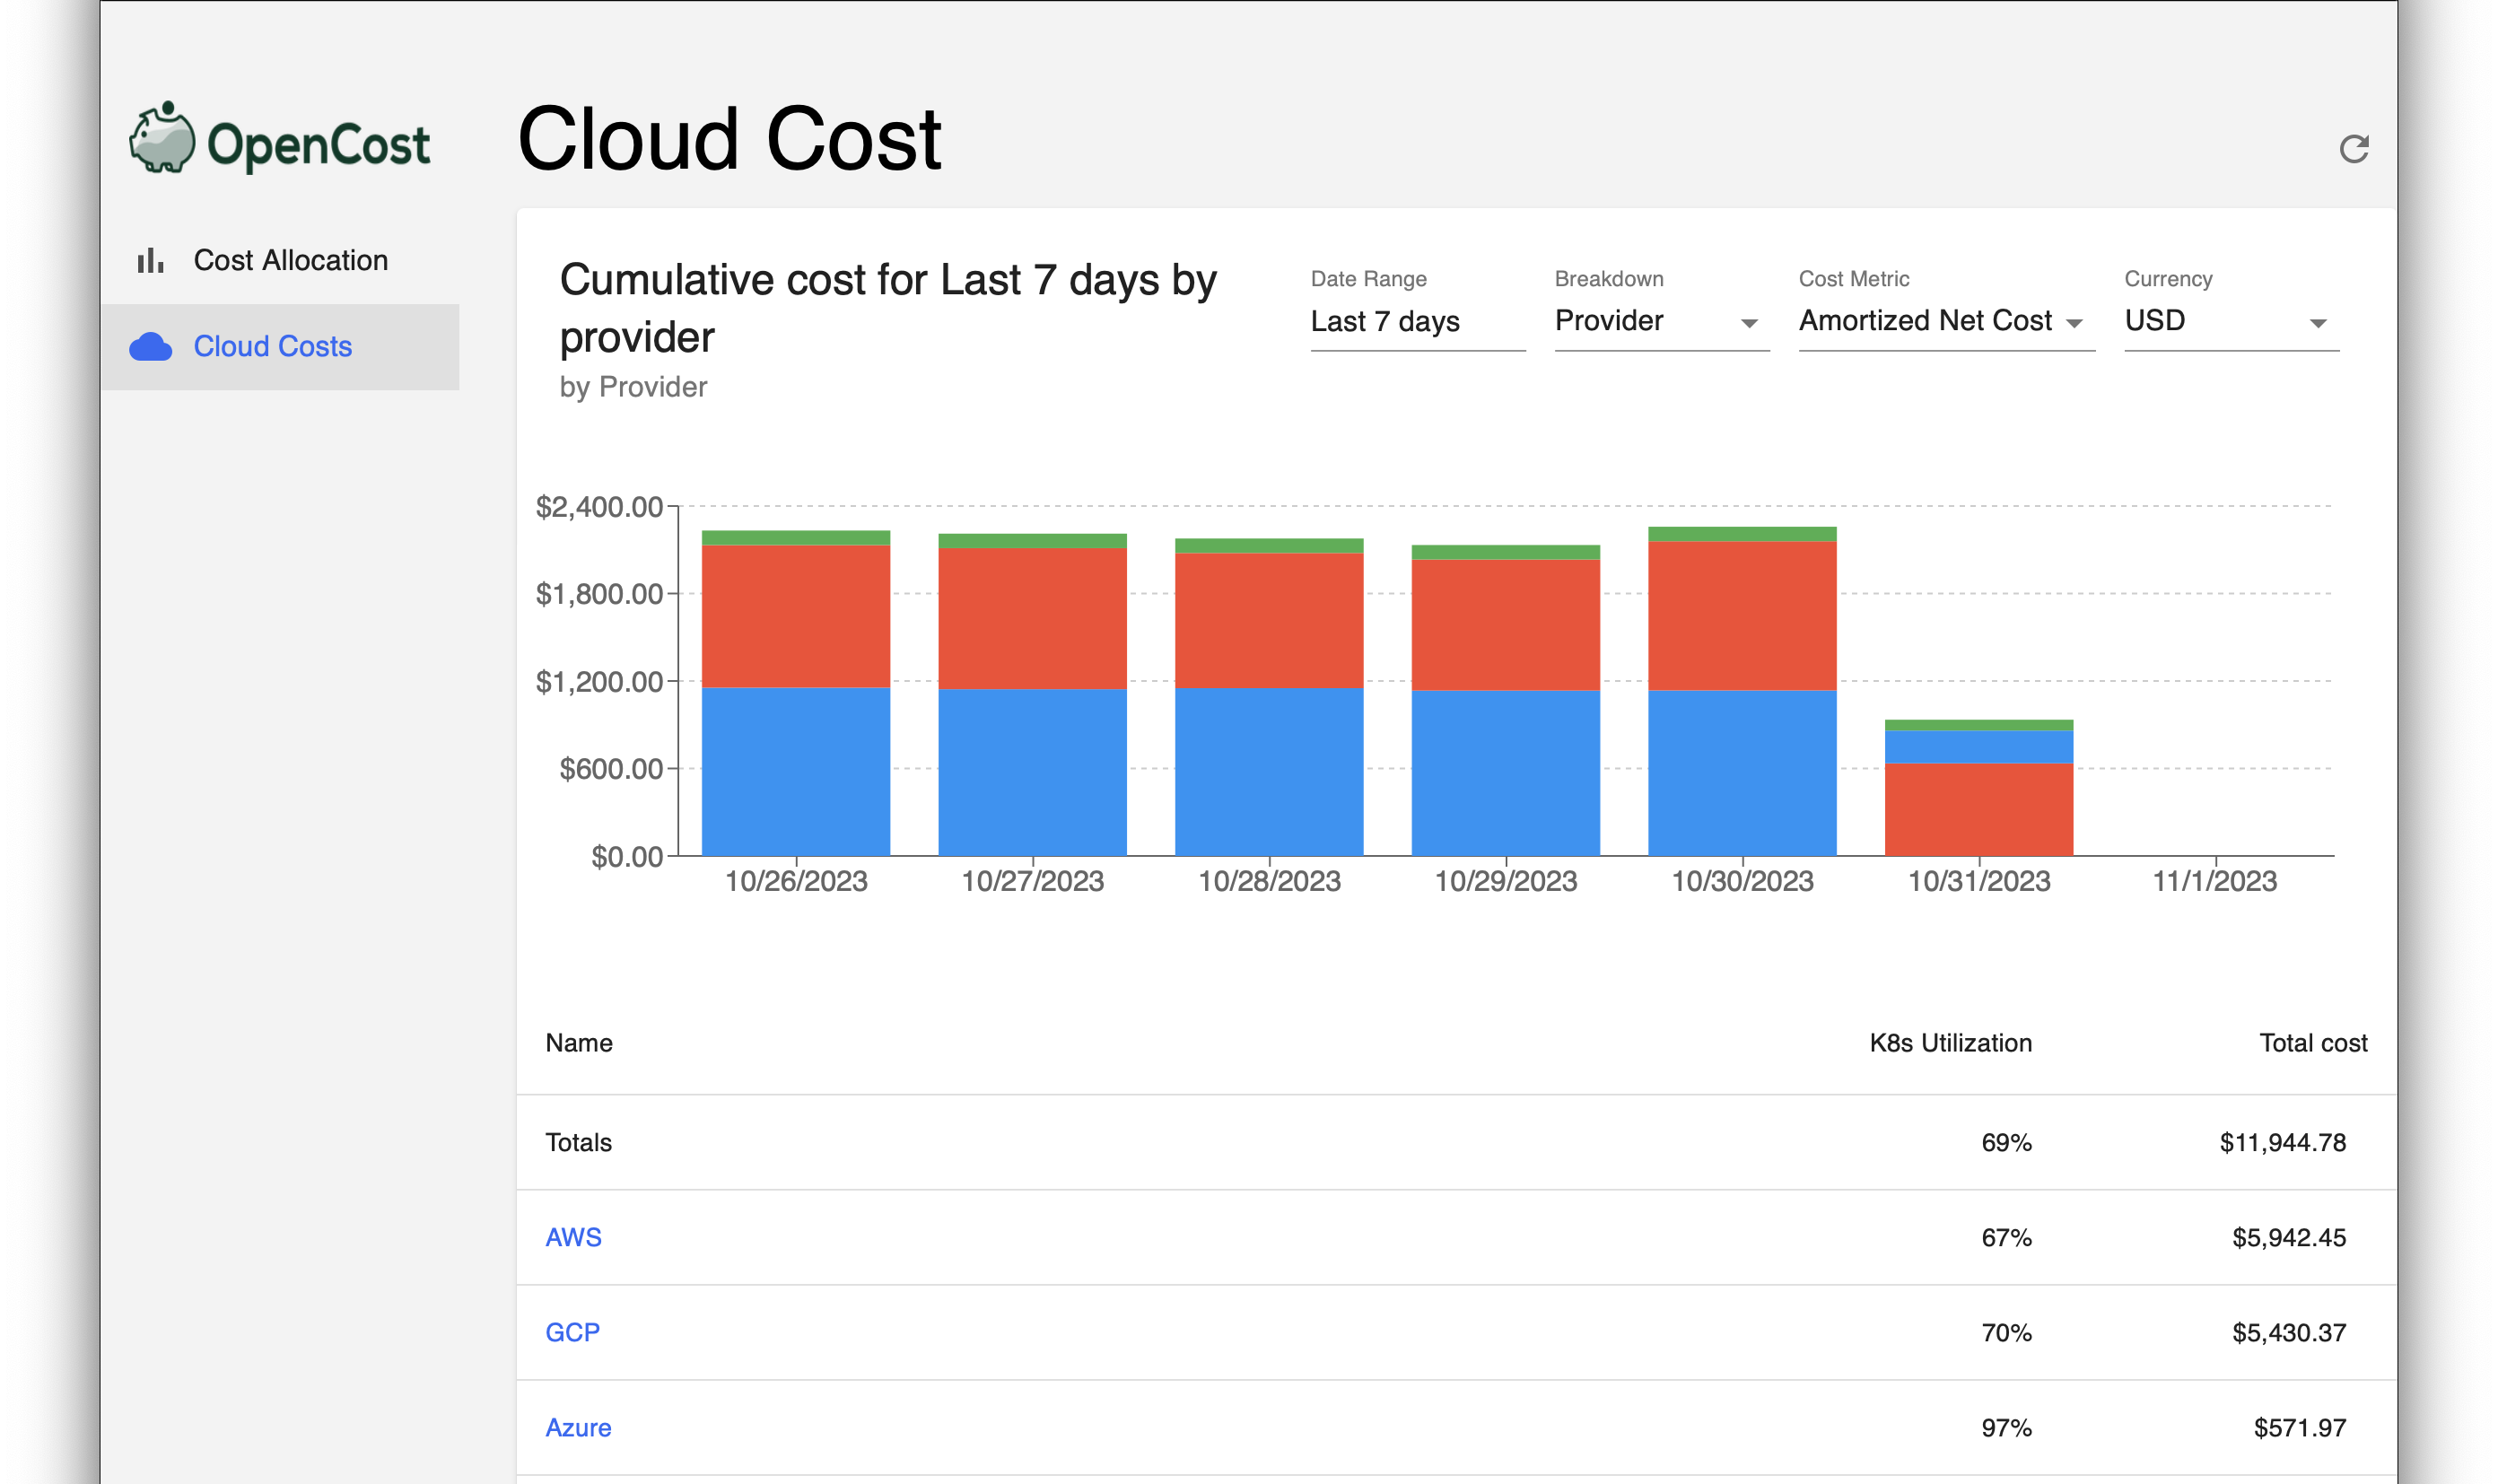 OpenCost UI now allows you to monitor cloud cost by service, tag, and more. It also provides the ability to drill down all the way to individual item level.